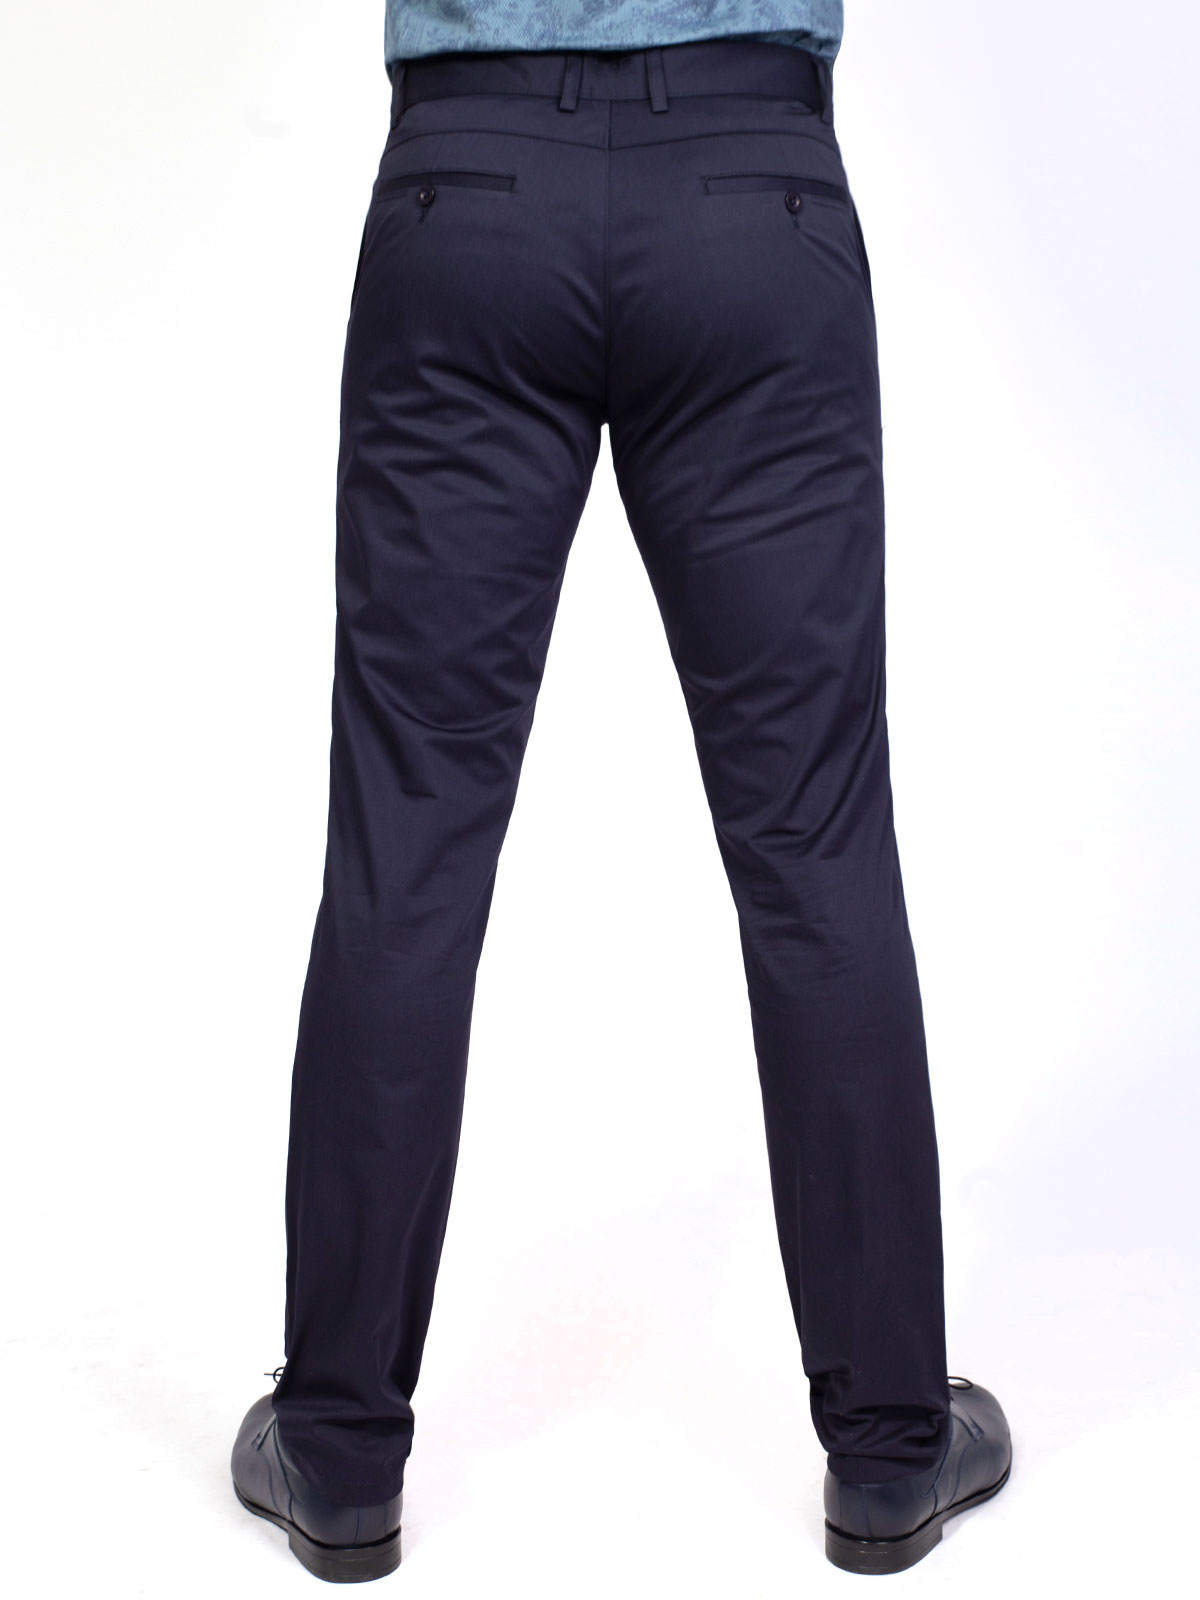  fitted navy blue sporty elegant pants  - 63189 € 44.40 img2